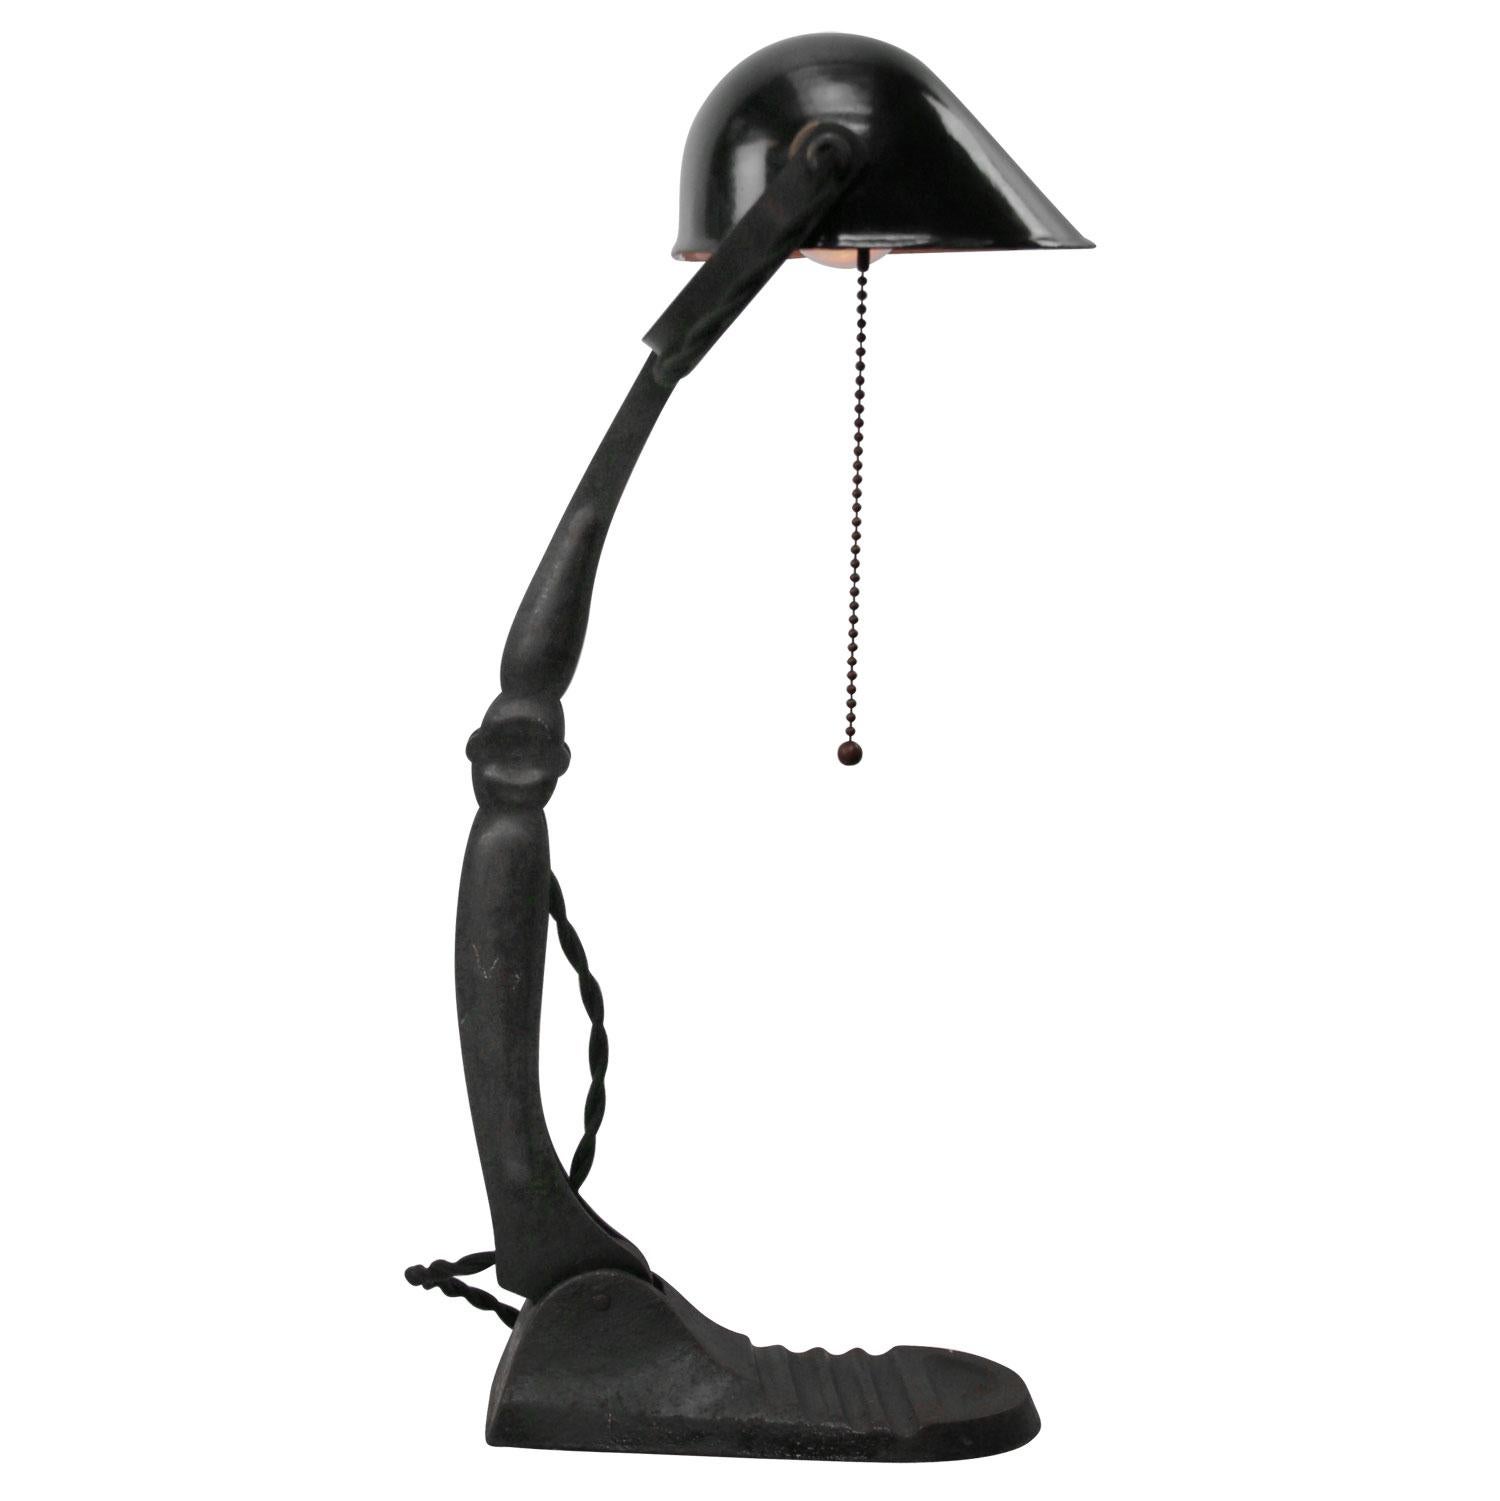 Hungarian black enamel desk light
2.5 meter black cotton flex, plug and pul switch

Also available with US/UK plug

Weight: 2.30 kg / 5.1 lb

Priced per individual item. All lamps have been made suitable by international standards for